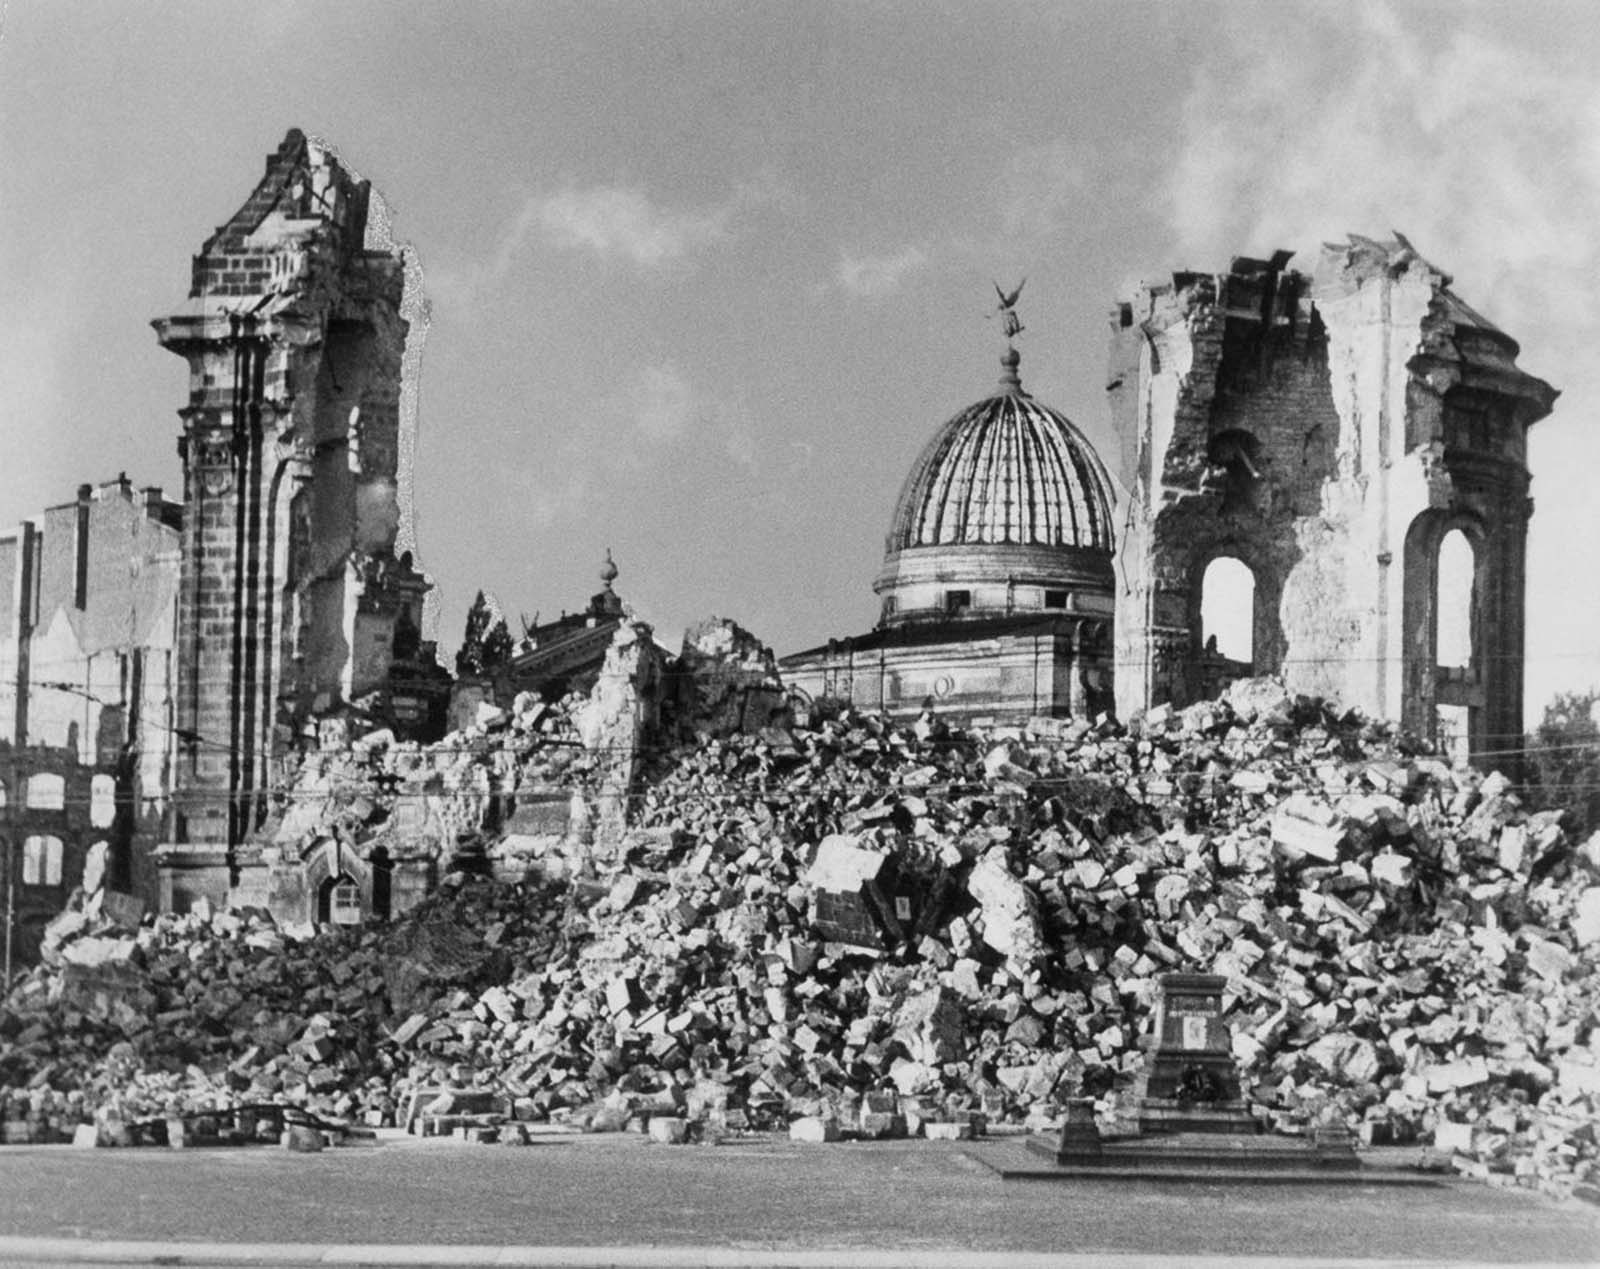 The ruins of the Frauenkirche and the dome of the Kunstakademie.